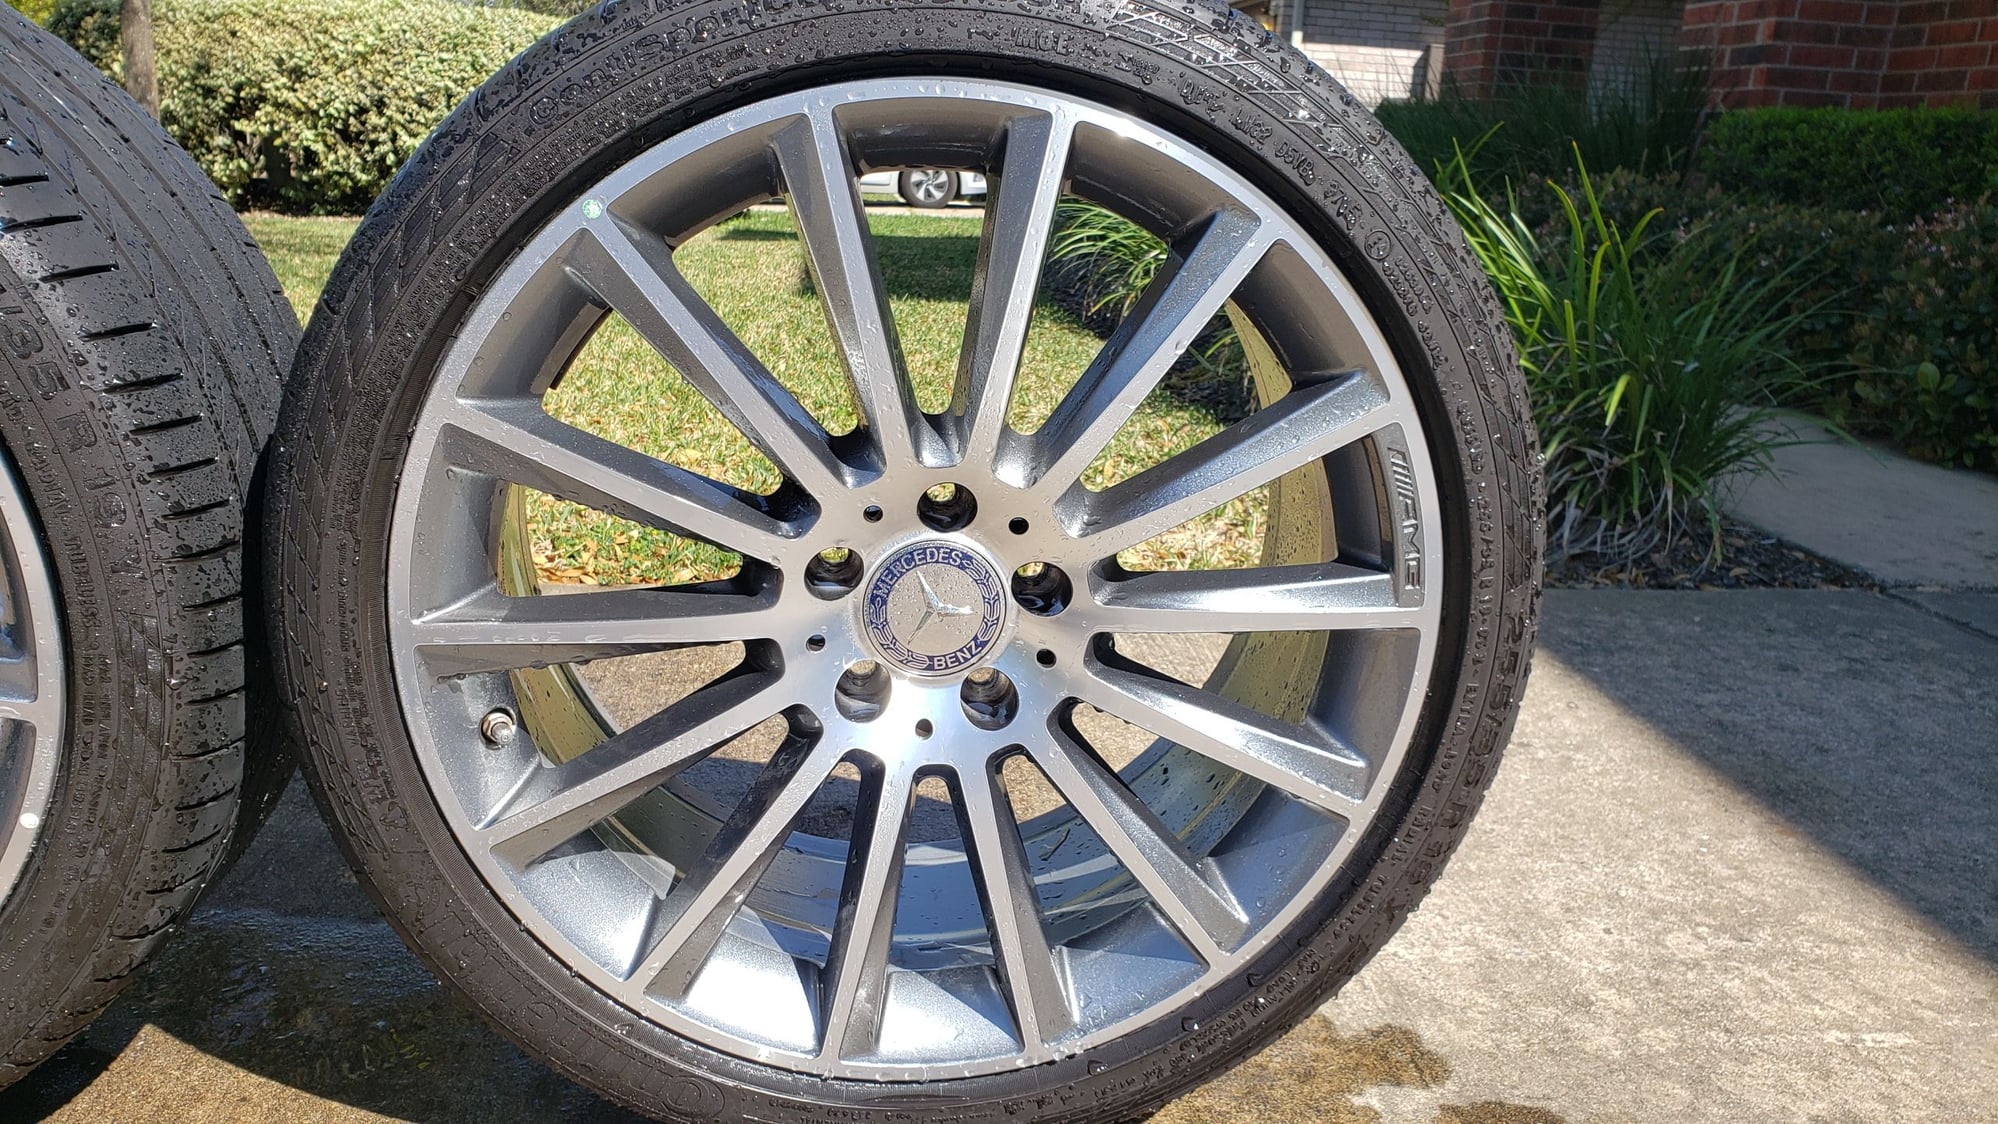 Wheels and Tires/Axles - C450 20 spoke amg wheels and sensor <16miles for sale Austin TX - Used - 2016 Mercedes-Benz C450 AMG - Austin, TX 78739, United States